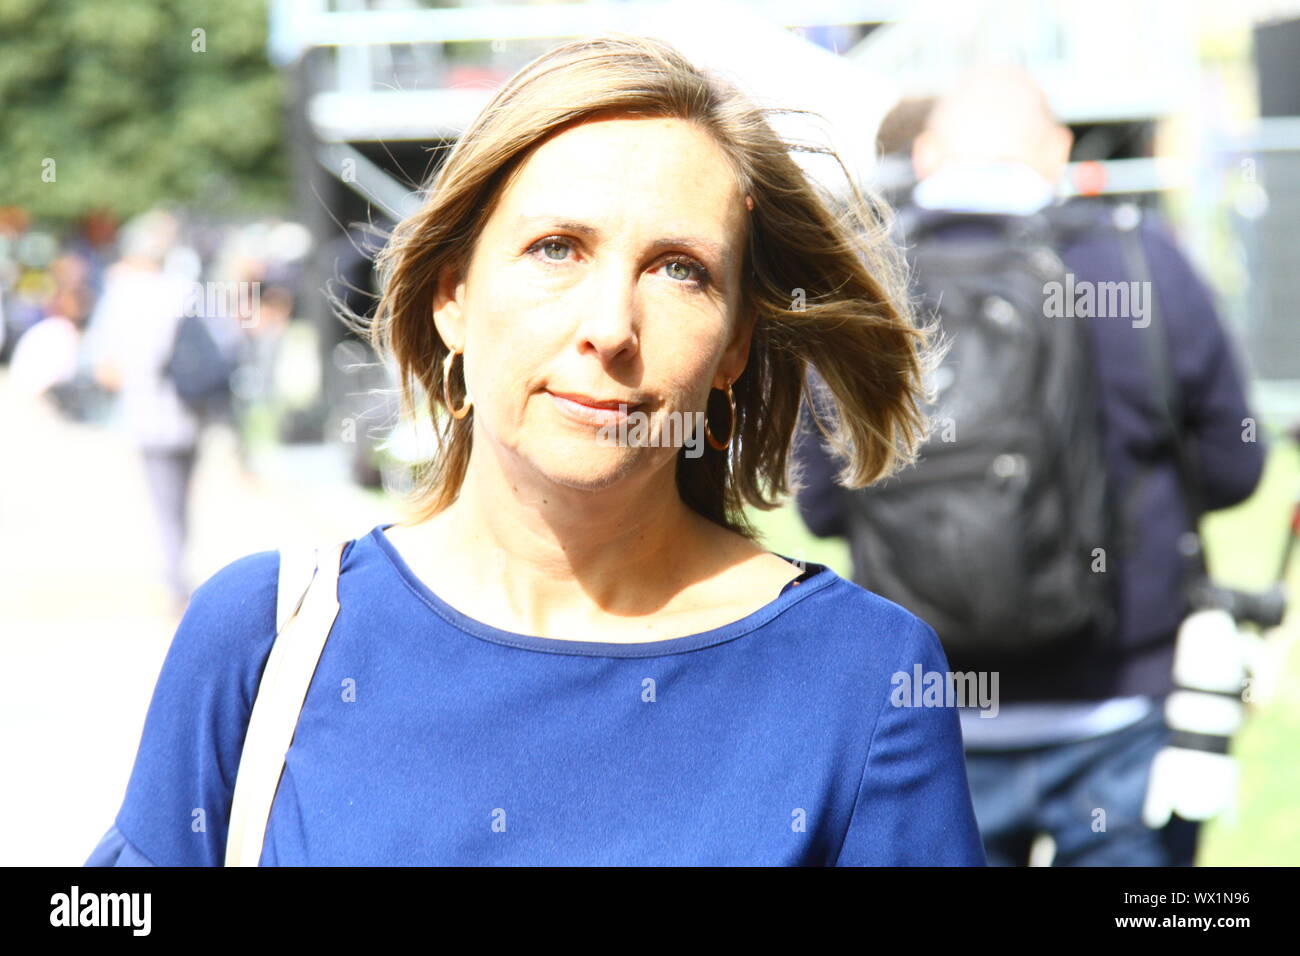 VICKY YOUNG CHIEF POLITICAL CORRESPONDENT OF BBC NEWS IN THE LONDON BOROUGH OF WESTMINSTER ON 5TH SEPTEMBER 2019. BUSY BREXIT TIMES FOR BRITISH JOURNALISTS. NEWS PRESENTERS. NEWS READERS. Stock Photo